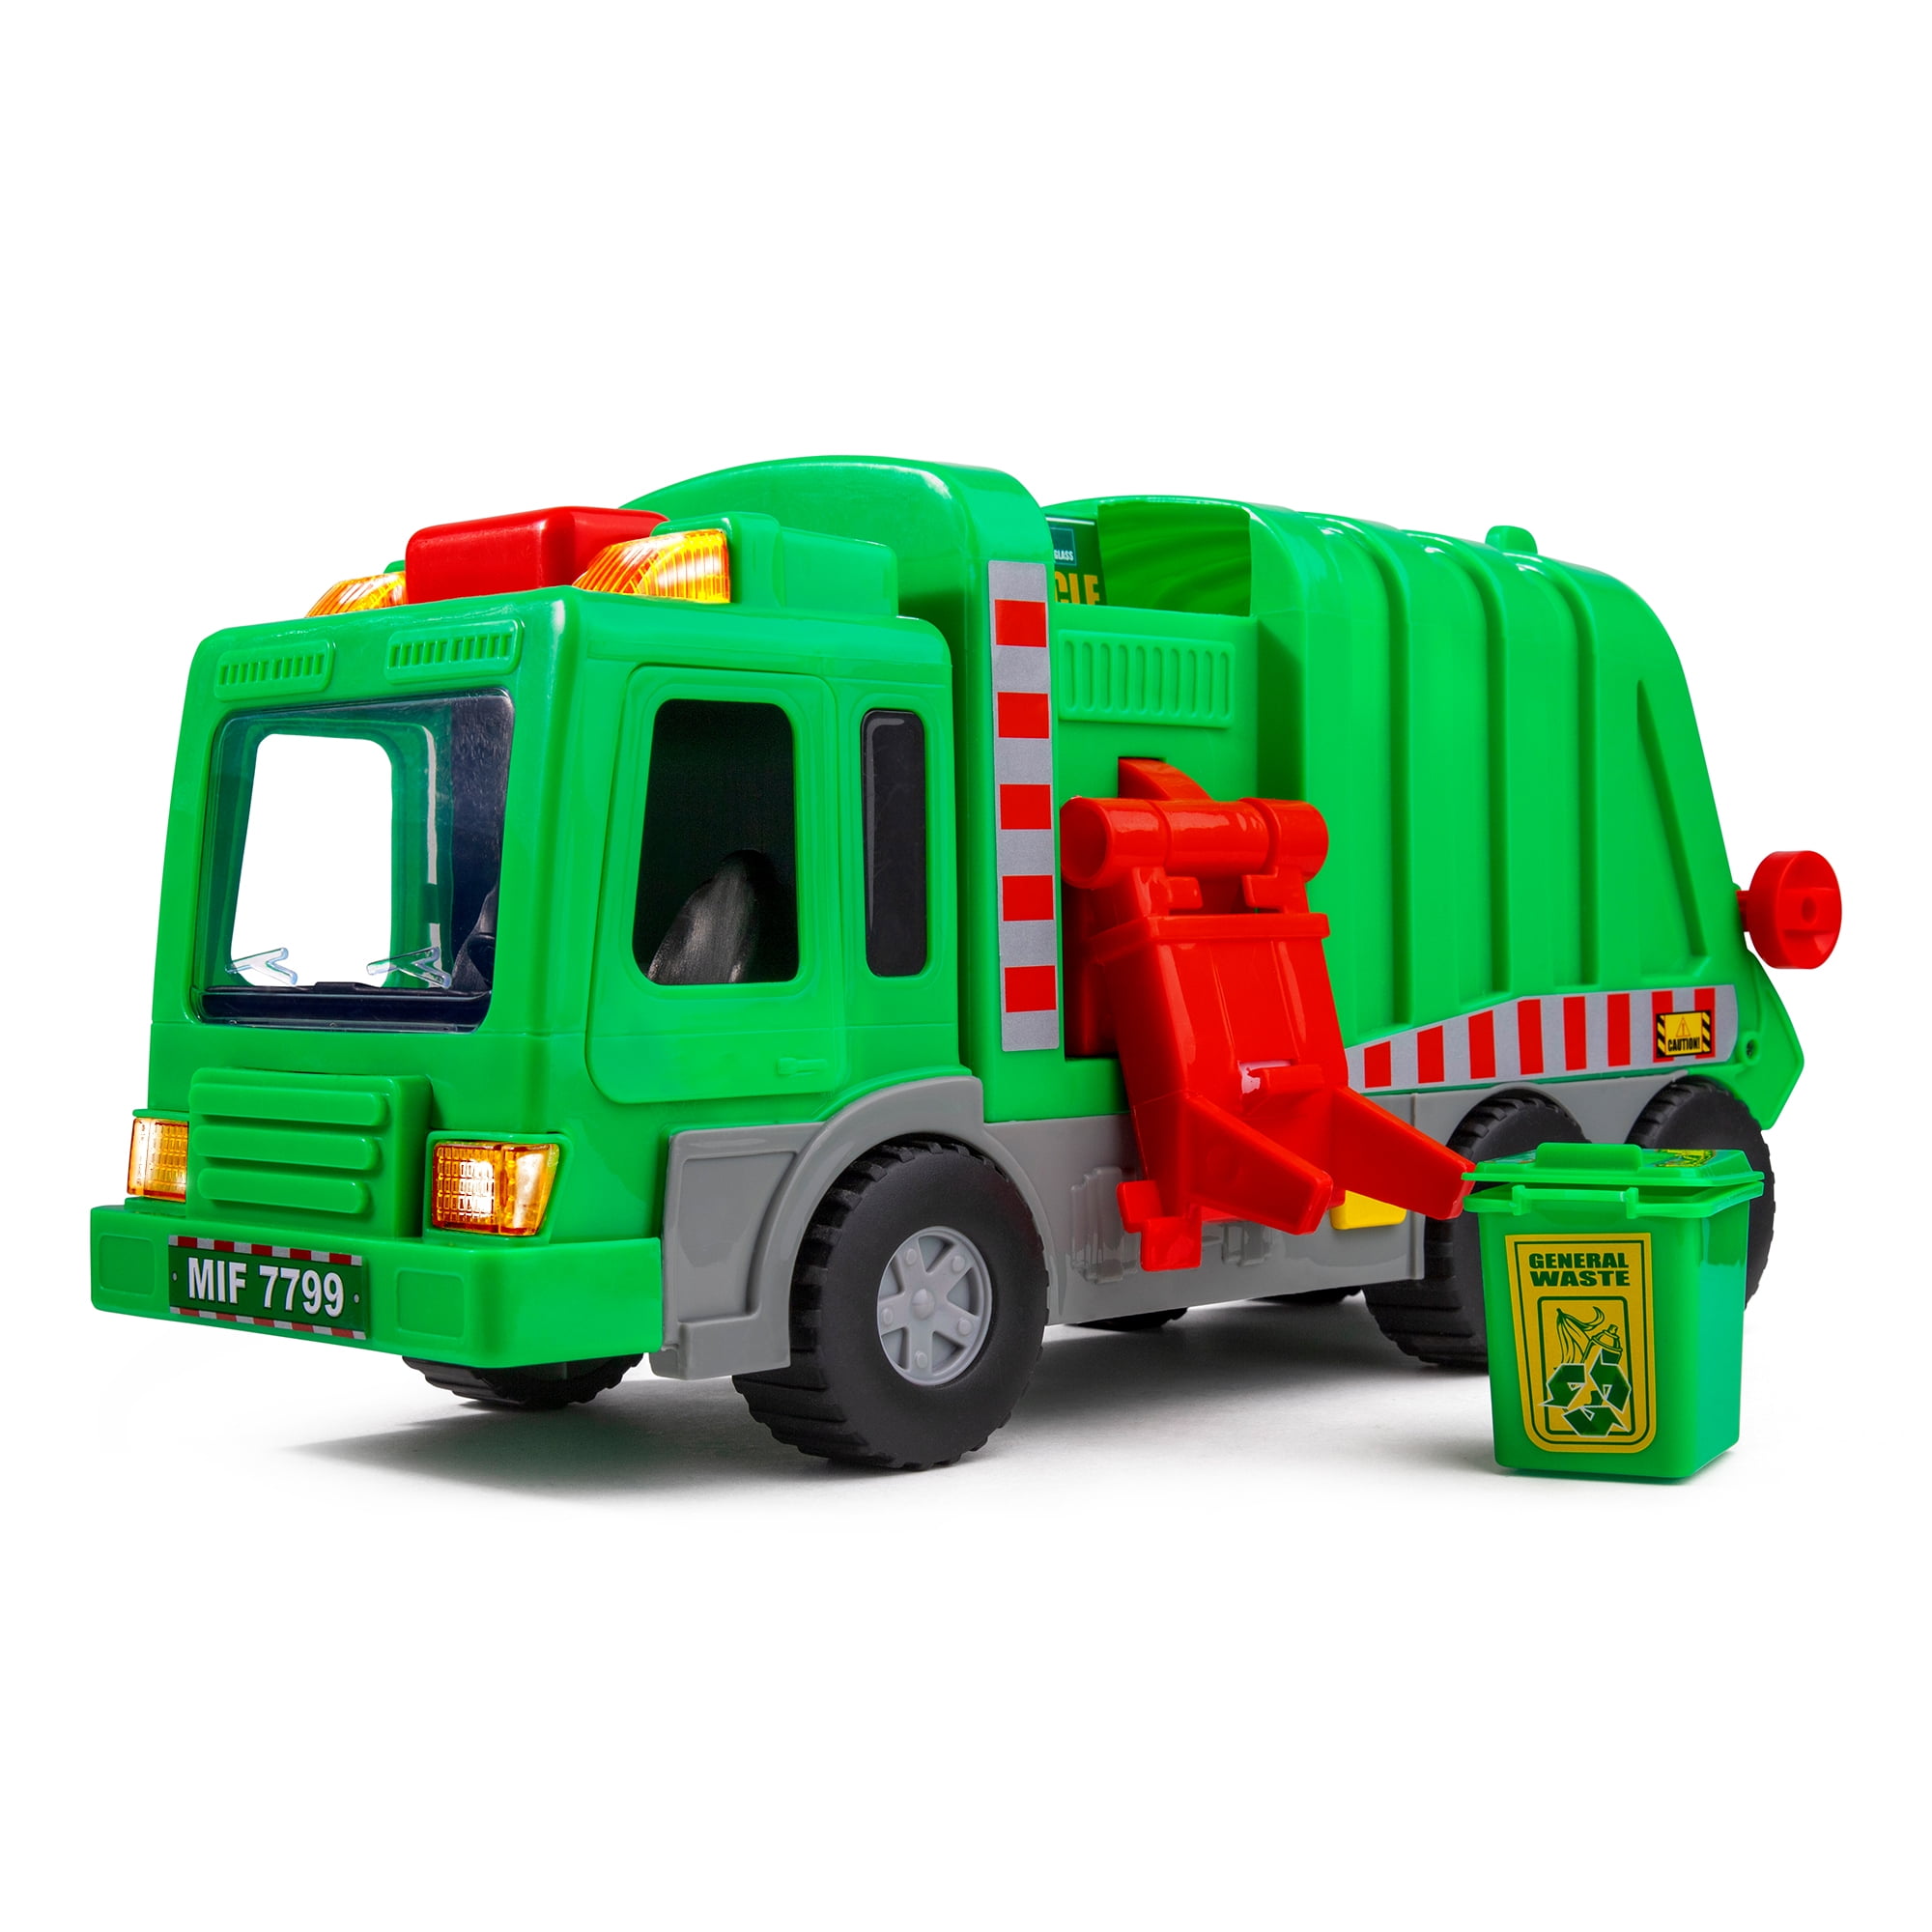 Real Working Buddies Mr Dusty The Super Duper Toy Eating Garbage Truck 58385 for sale online 